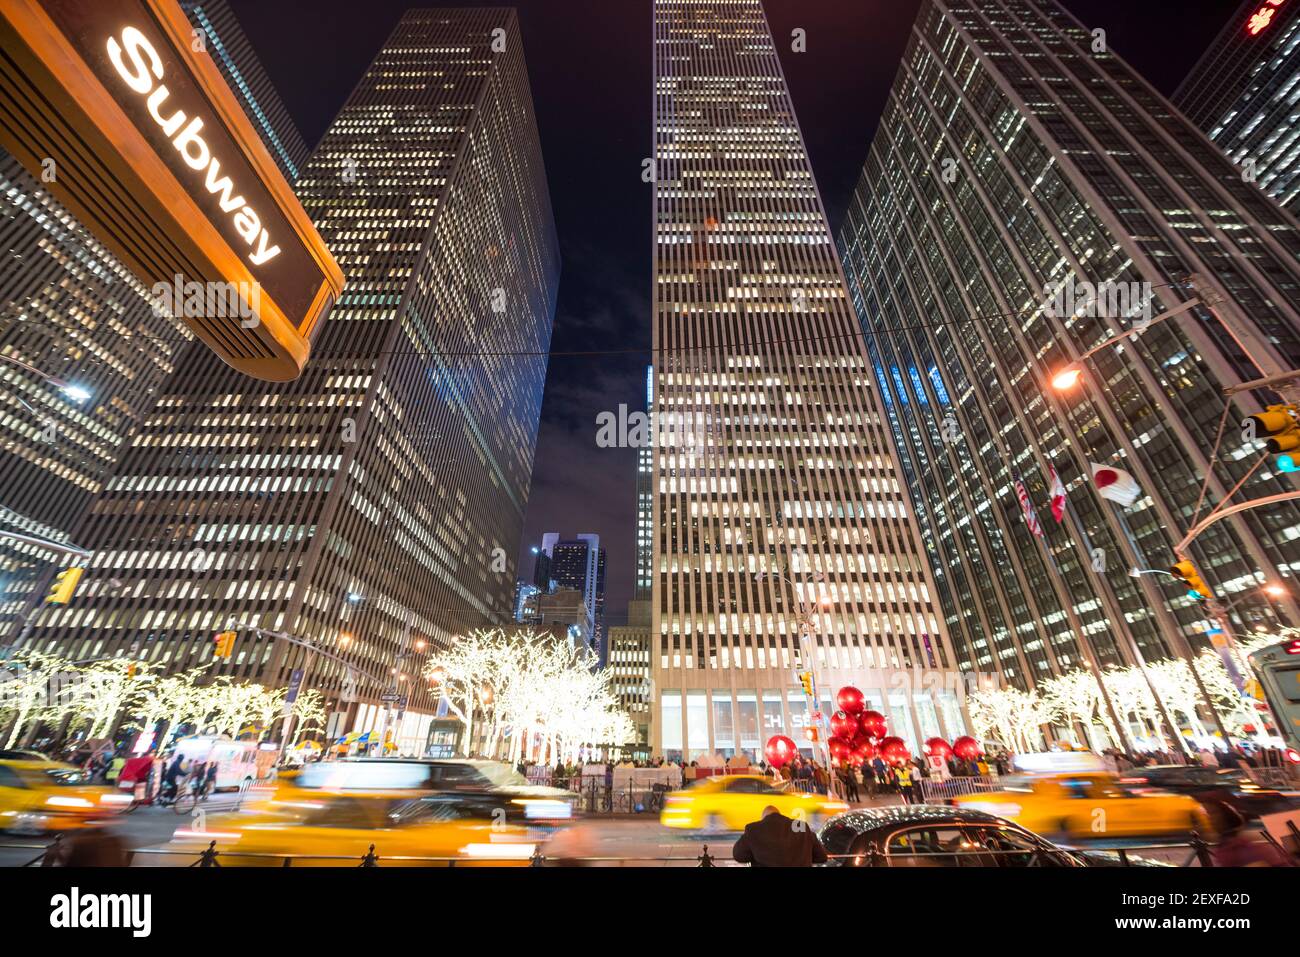 Midtown Sixth Avenue traffic goes through among the rows of high-rise buildings during the Christmas Holiday Season in the night at New York City NY. Stock Photo